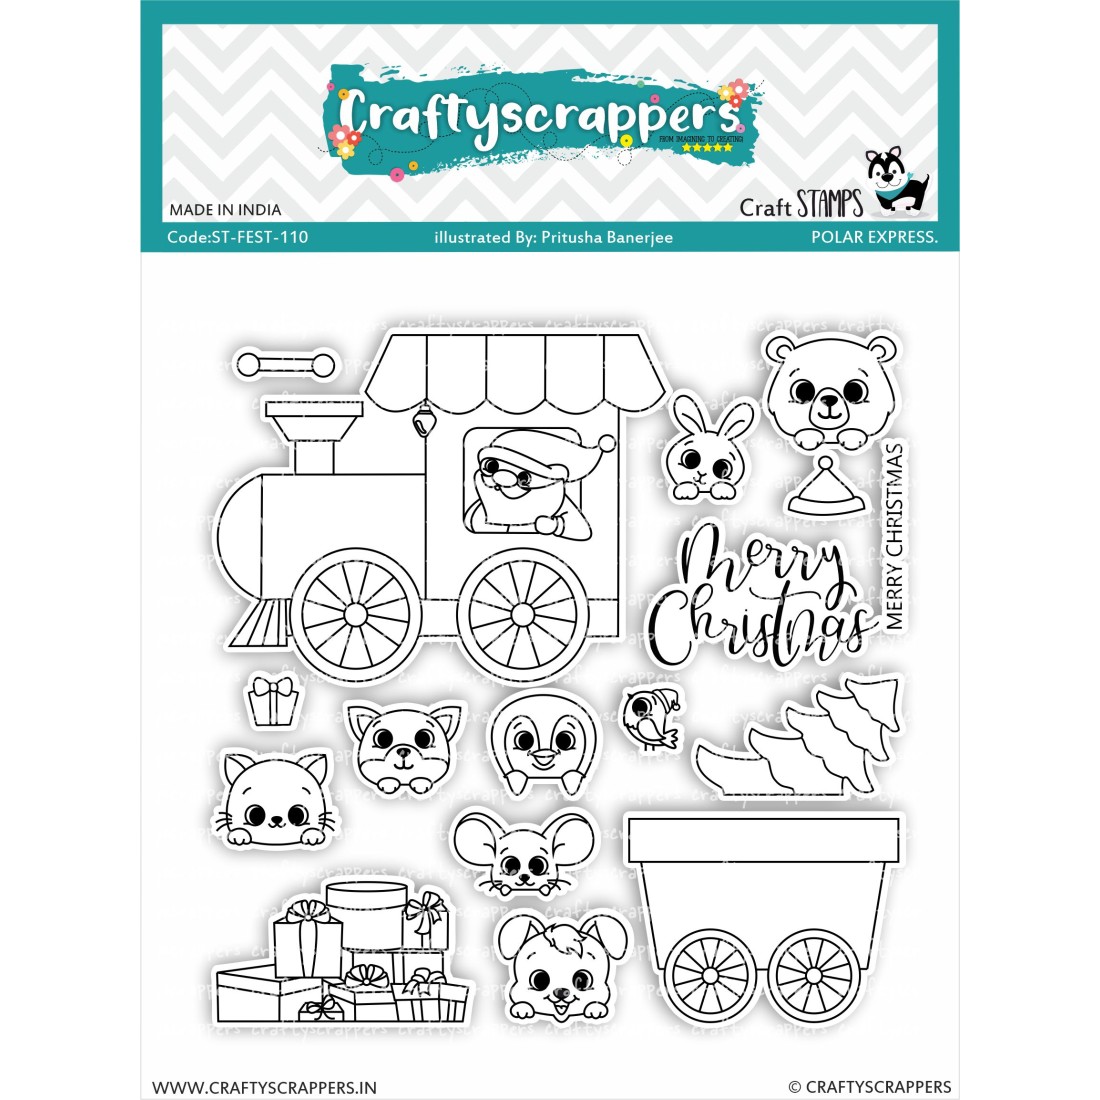 Craftyscrappers Stamps- POLAR EXPRESS